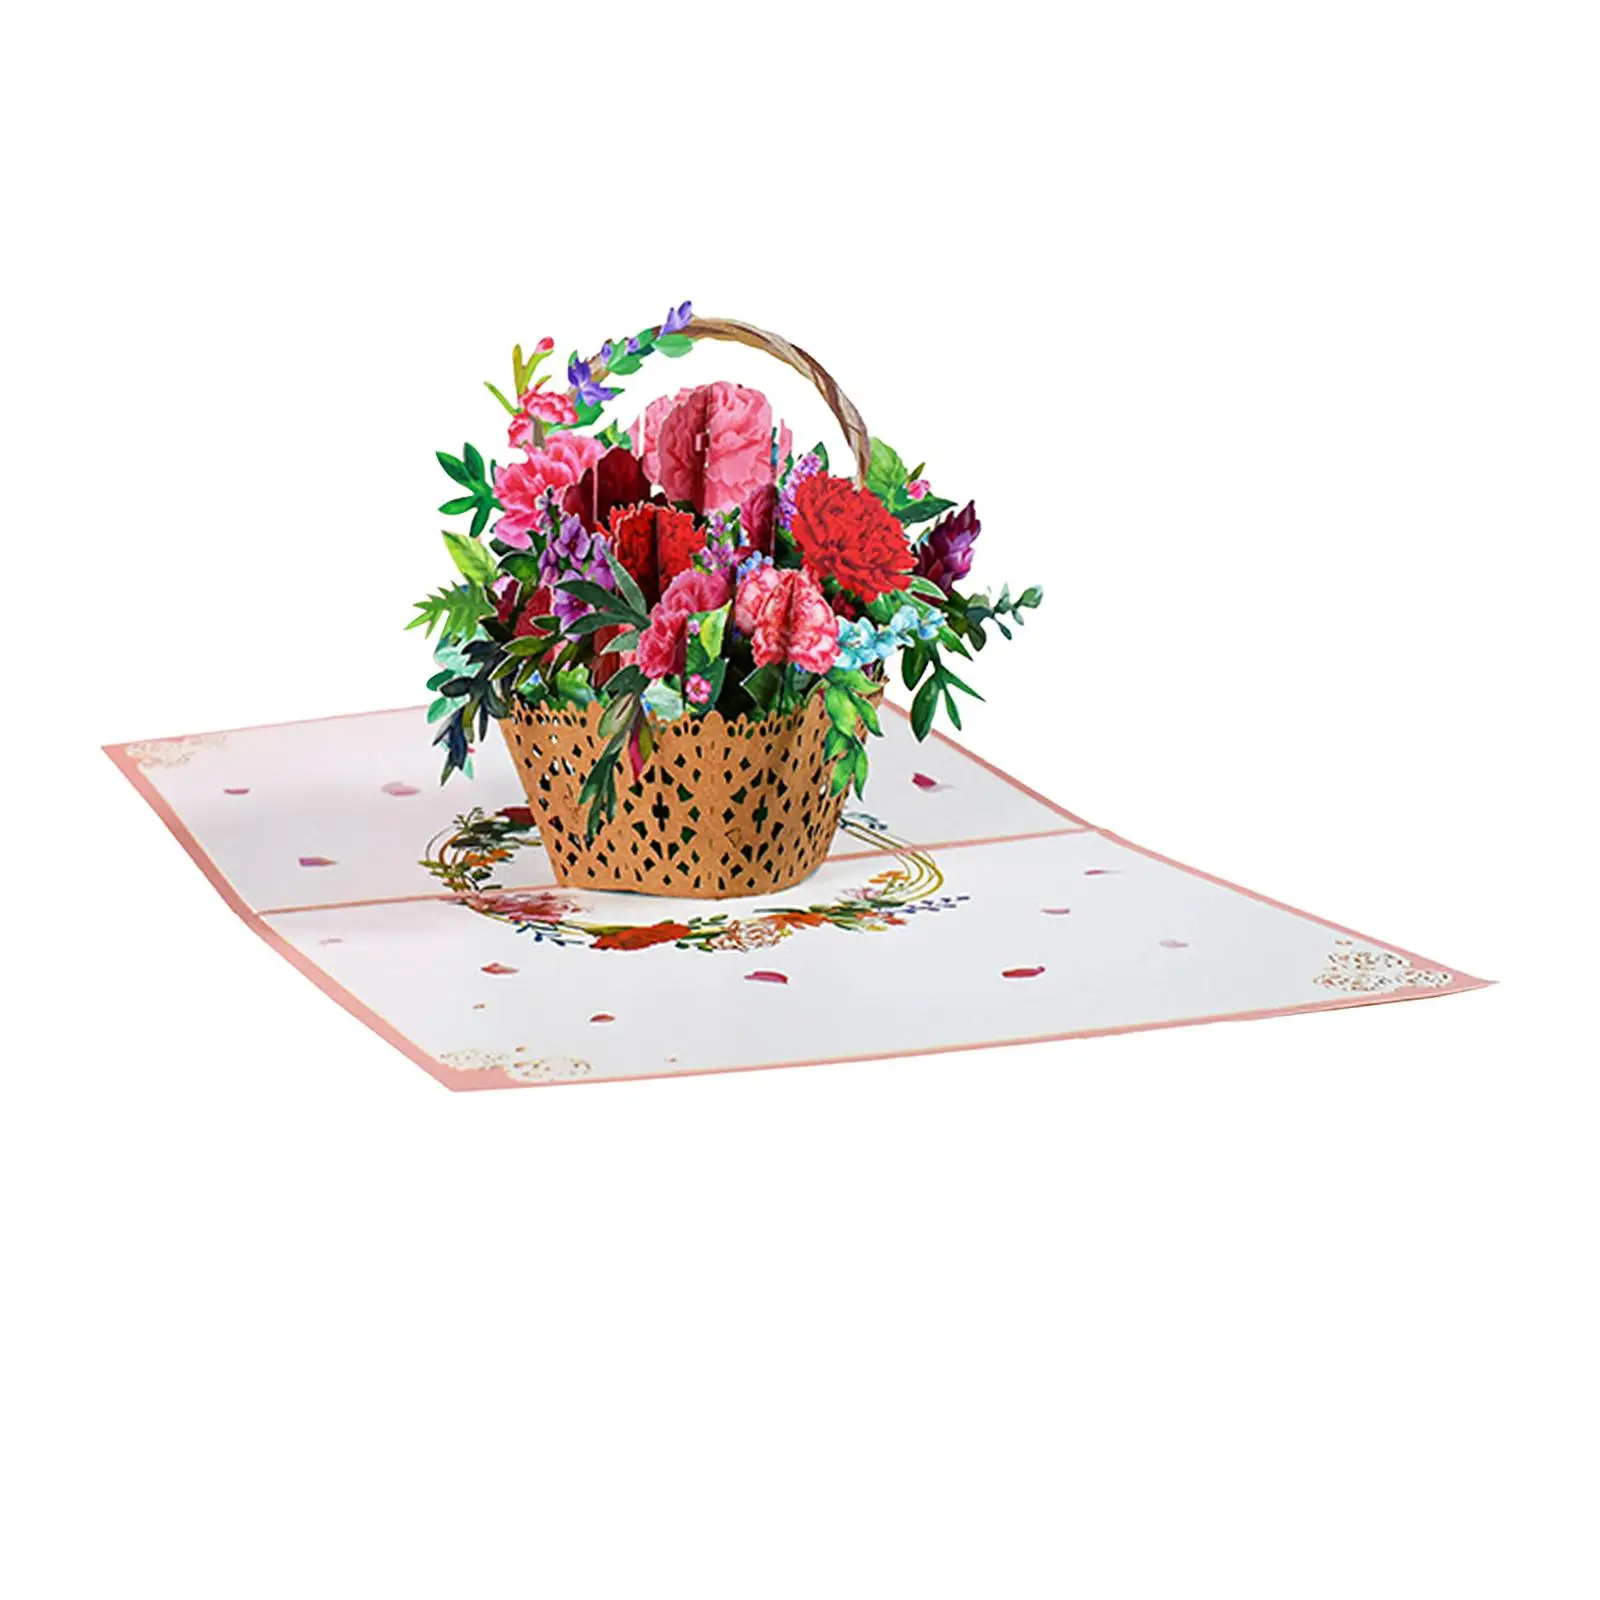 3D Greeting Cards with Note Card Creative Popup Greeting Card for Thinking You Wedding Birthday Party Favors Mother`s Day